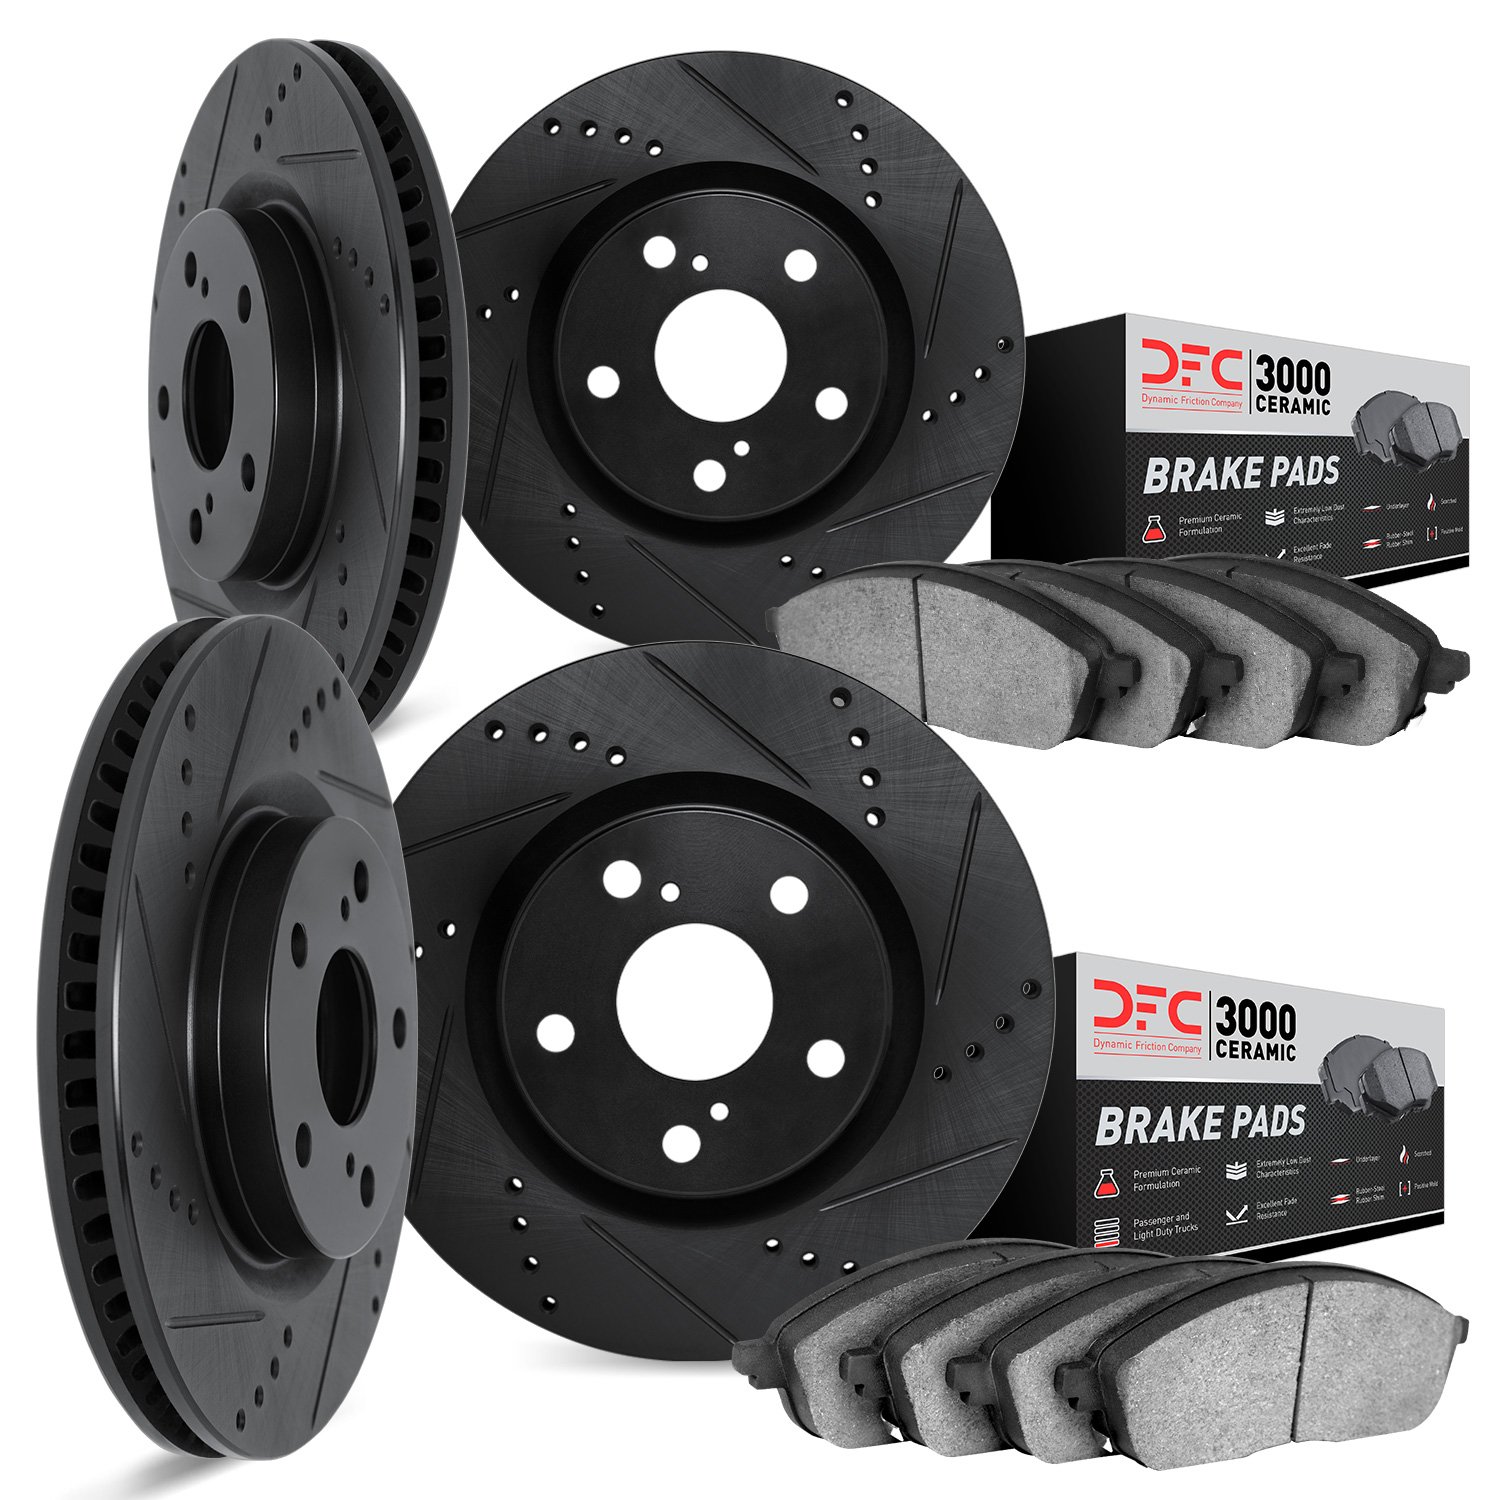 8304-72015 Drilled/Slotted Brake Rotors with 3000-Series Ceramic Brake Pads Kit [Black], 1992-1996 Mitsubishi, Position: Front a